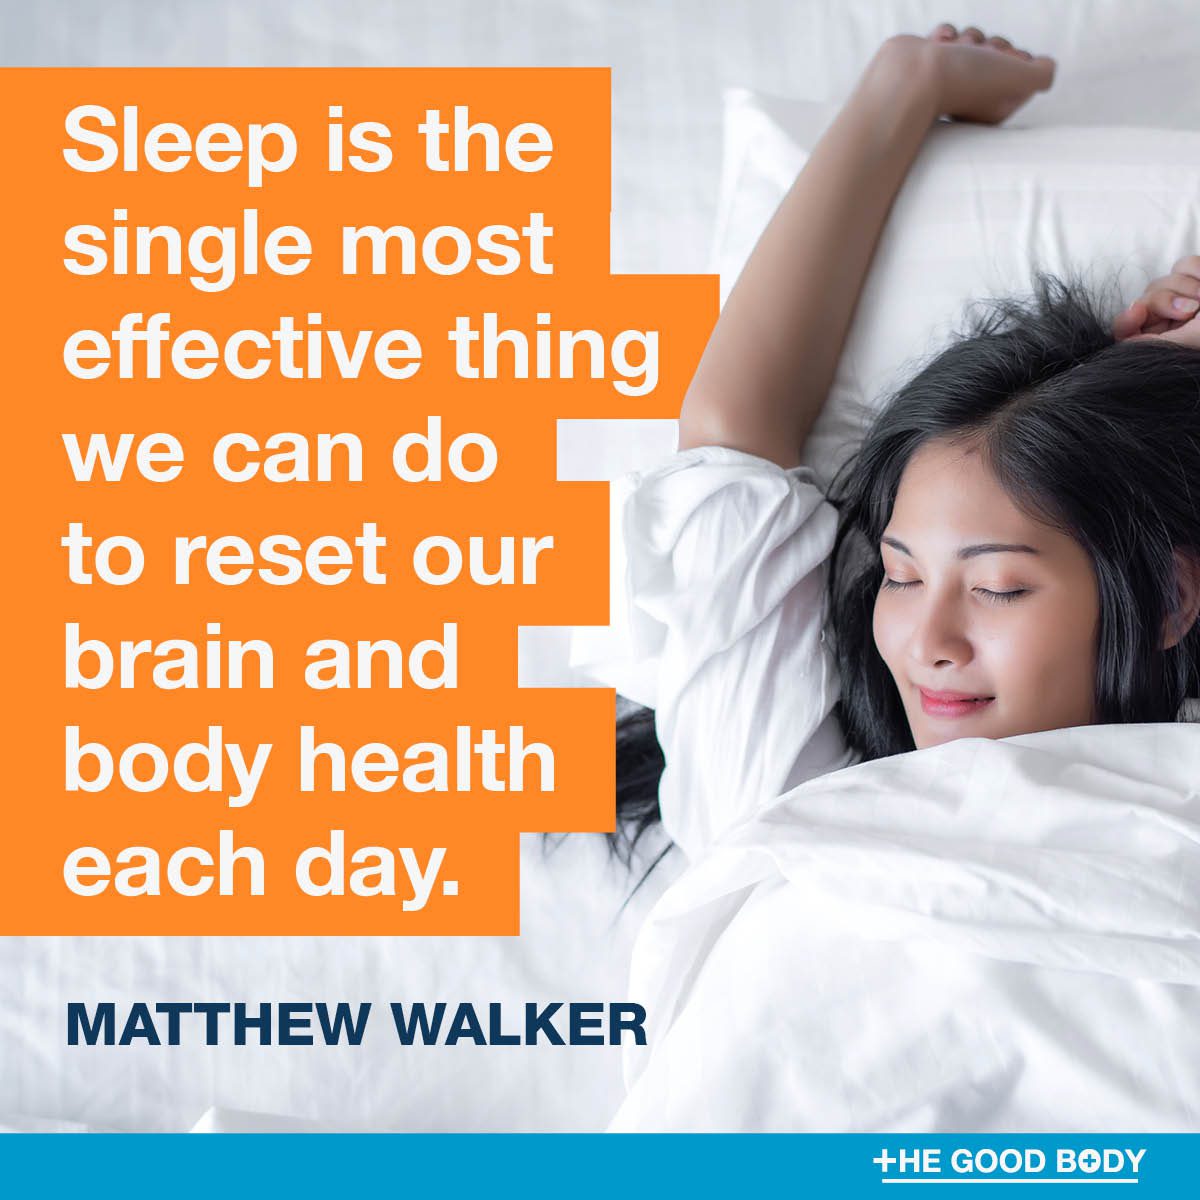 General Health and Wellness Quotes #5 by Matthew Walker